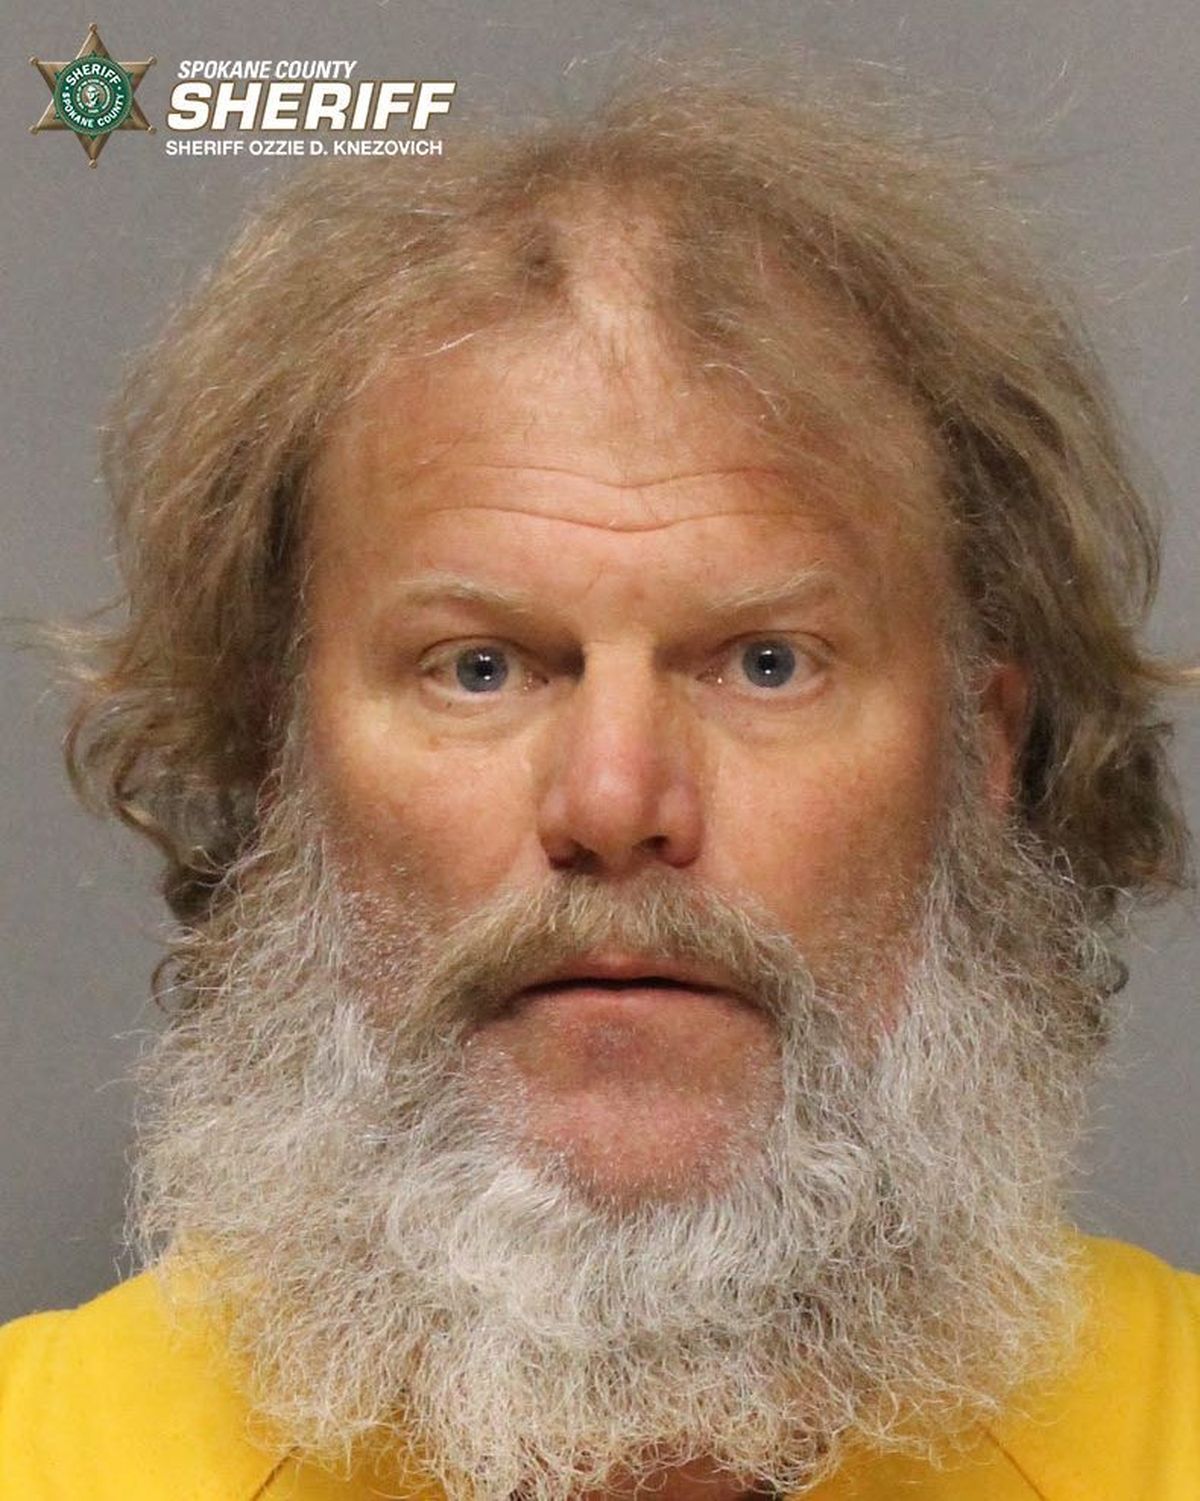 Eric A. Mork, 54, was charged with crimes related to sexually assaulting children.   (Emma Epperly / The Spokesman-Review)